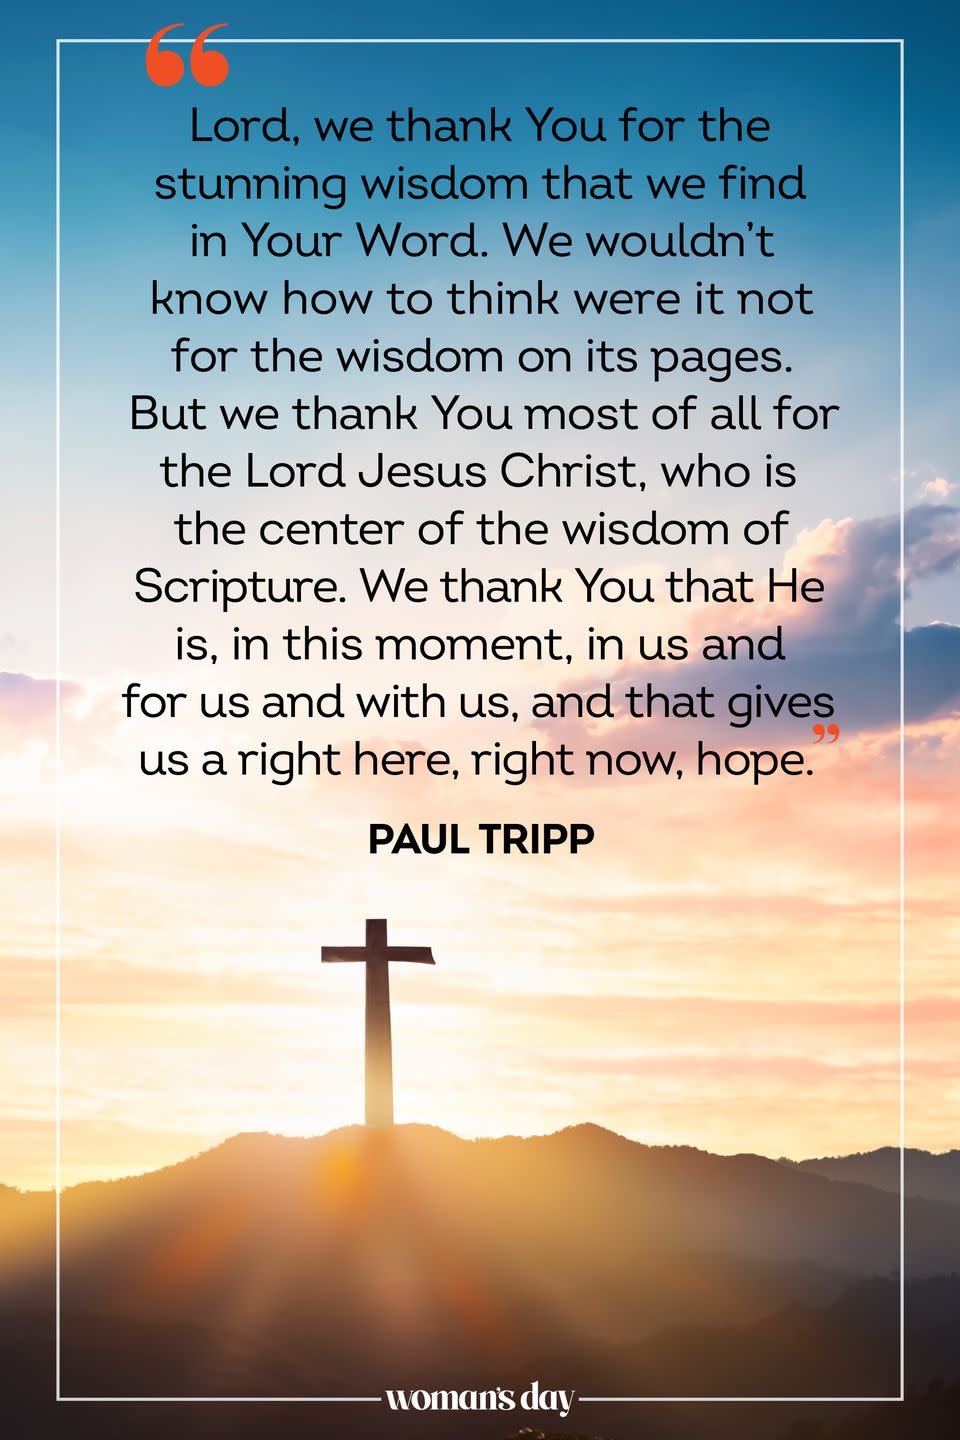 <p>Lord, we thank You for the stunning wisdom that we find in Your Word. We wouldn't know how to think were it not for the wisdom on its pages. But we thank You most of all for the Lord Jesus Christ, who is the center of the wisdom of Scripture. We thank You that He is, in this moment, in us and for us and with us, and that gives us a right here, right now, hope. </p><p>— Paul Tripp</p>